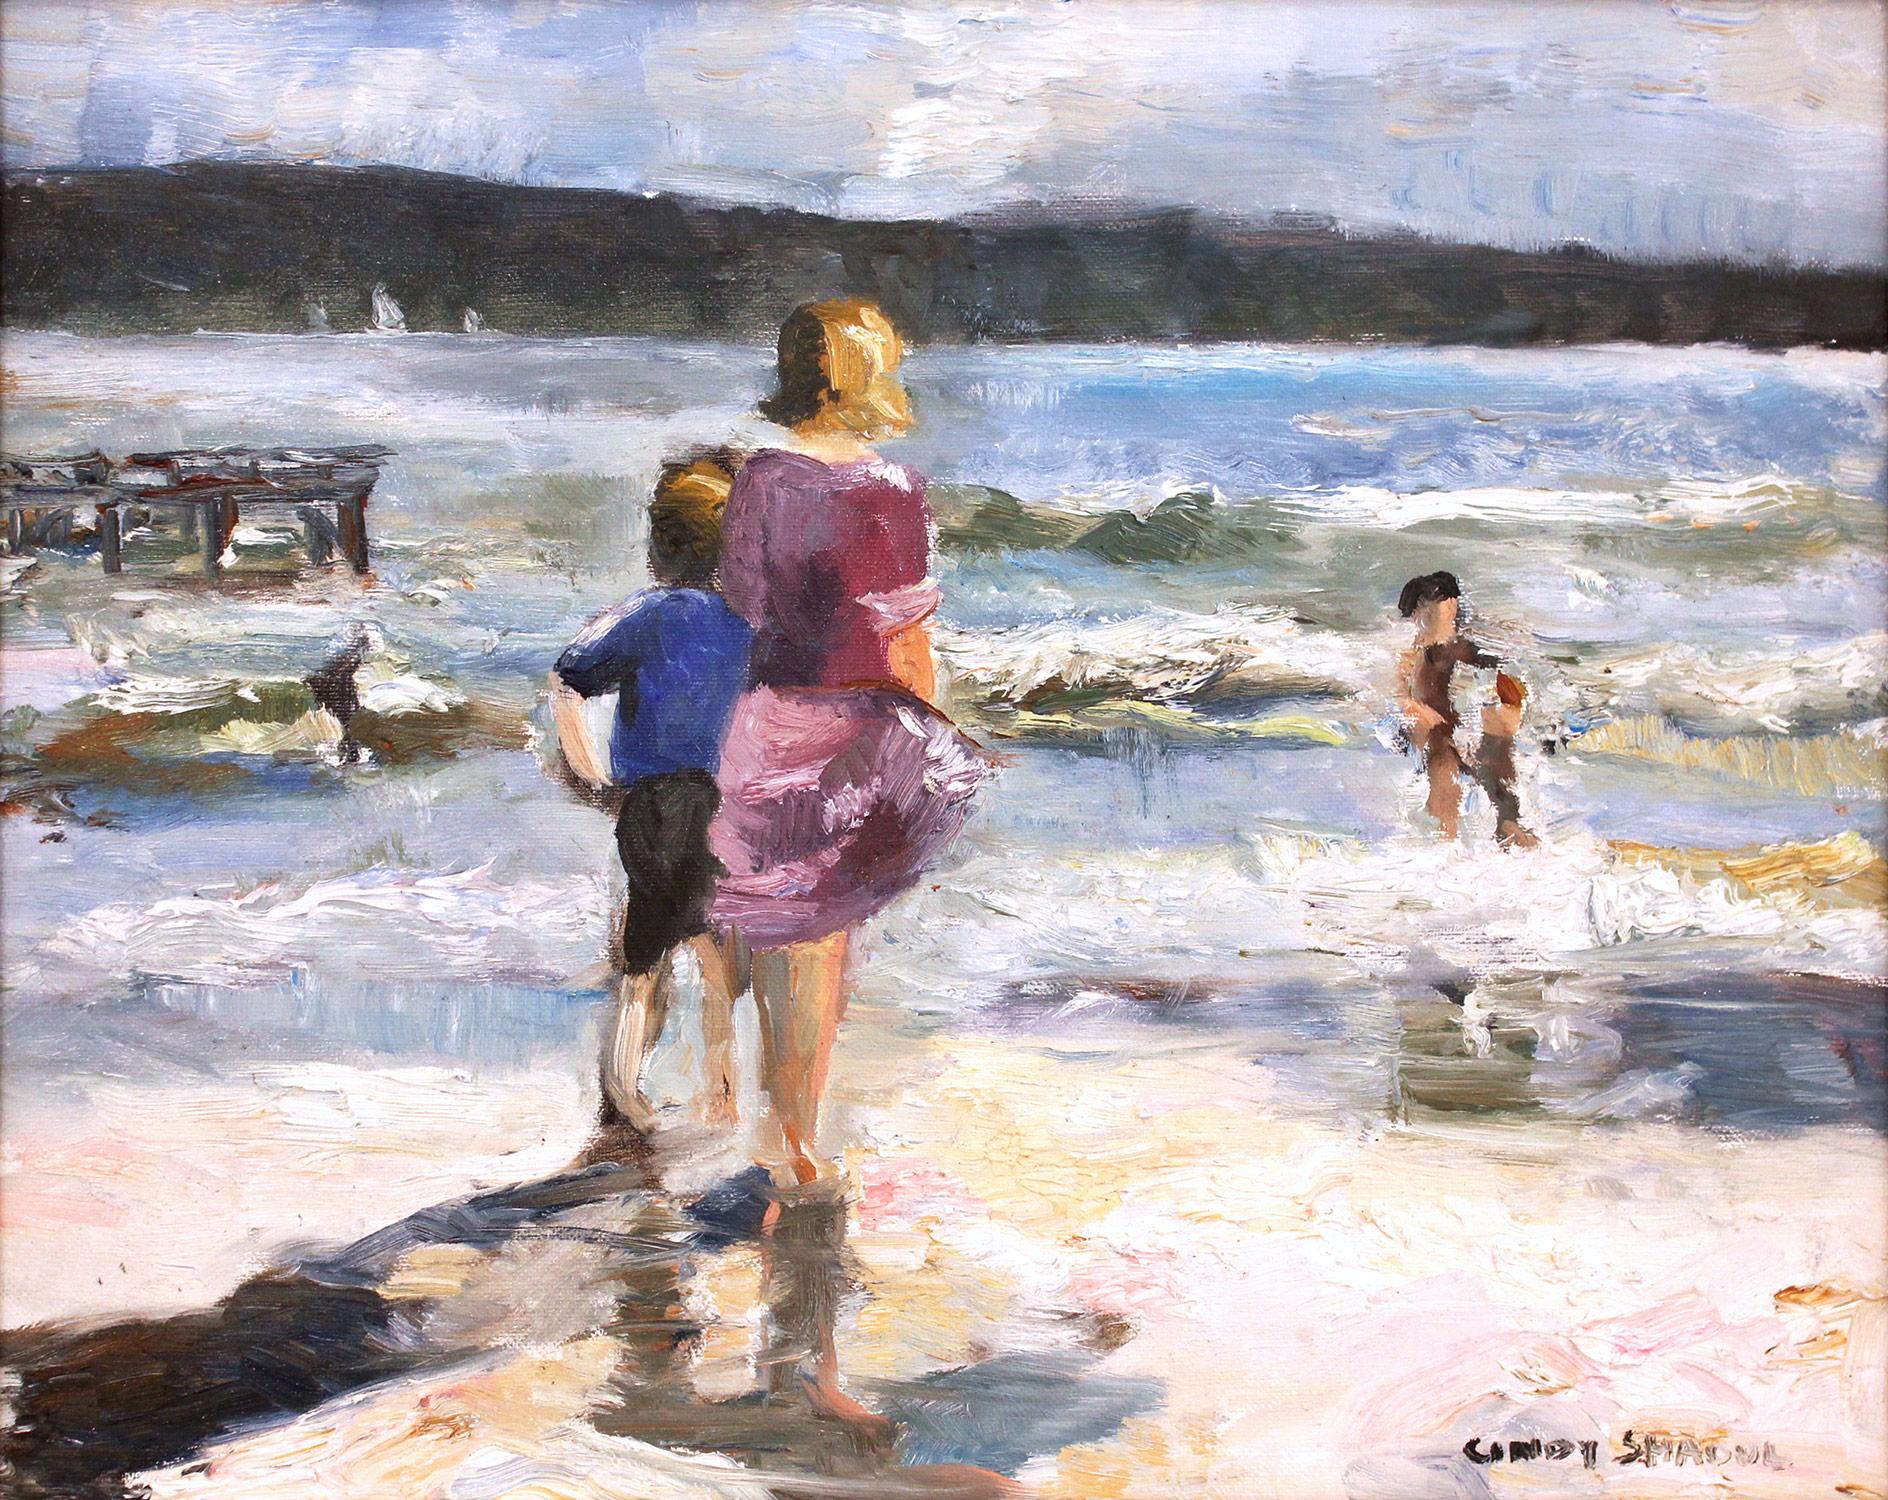 Cindy Shaoul Figurative Painting - "Kids on the Sand" Impressionistic Beach Scene Oil Painting on Canvas